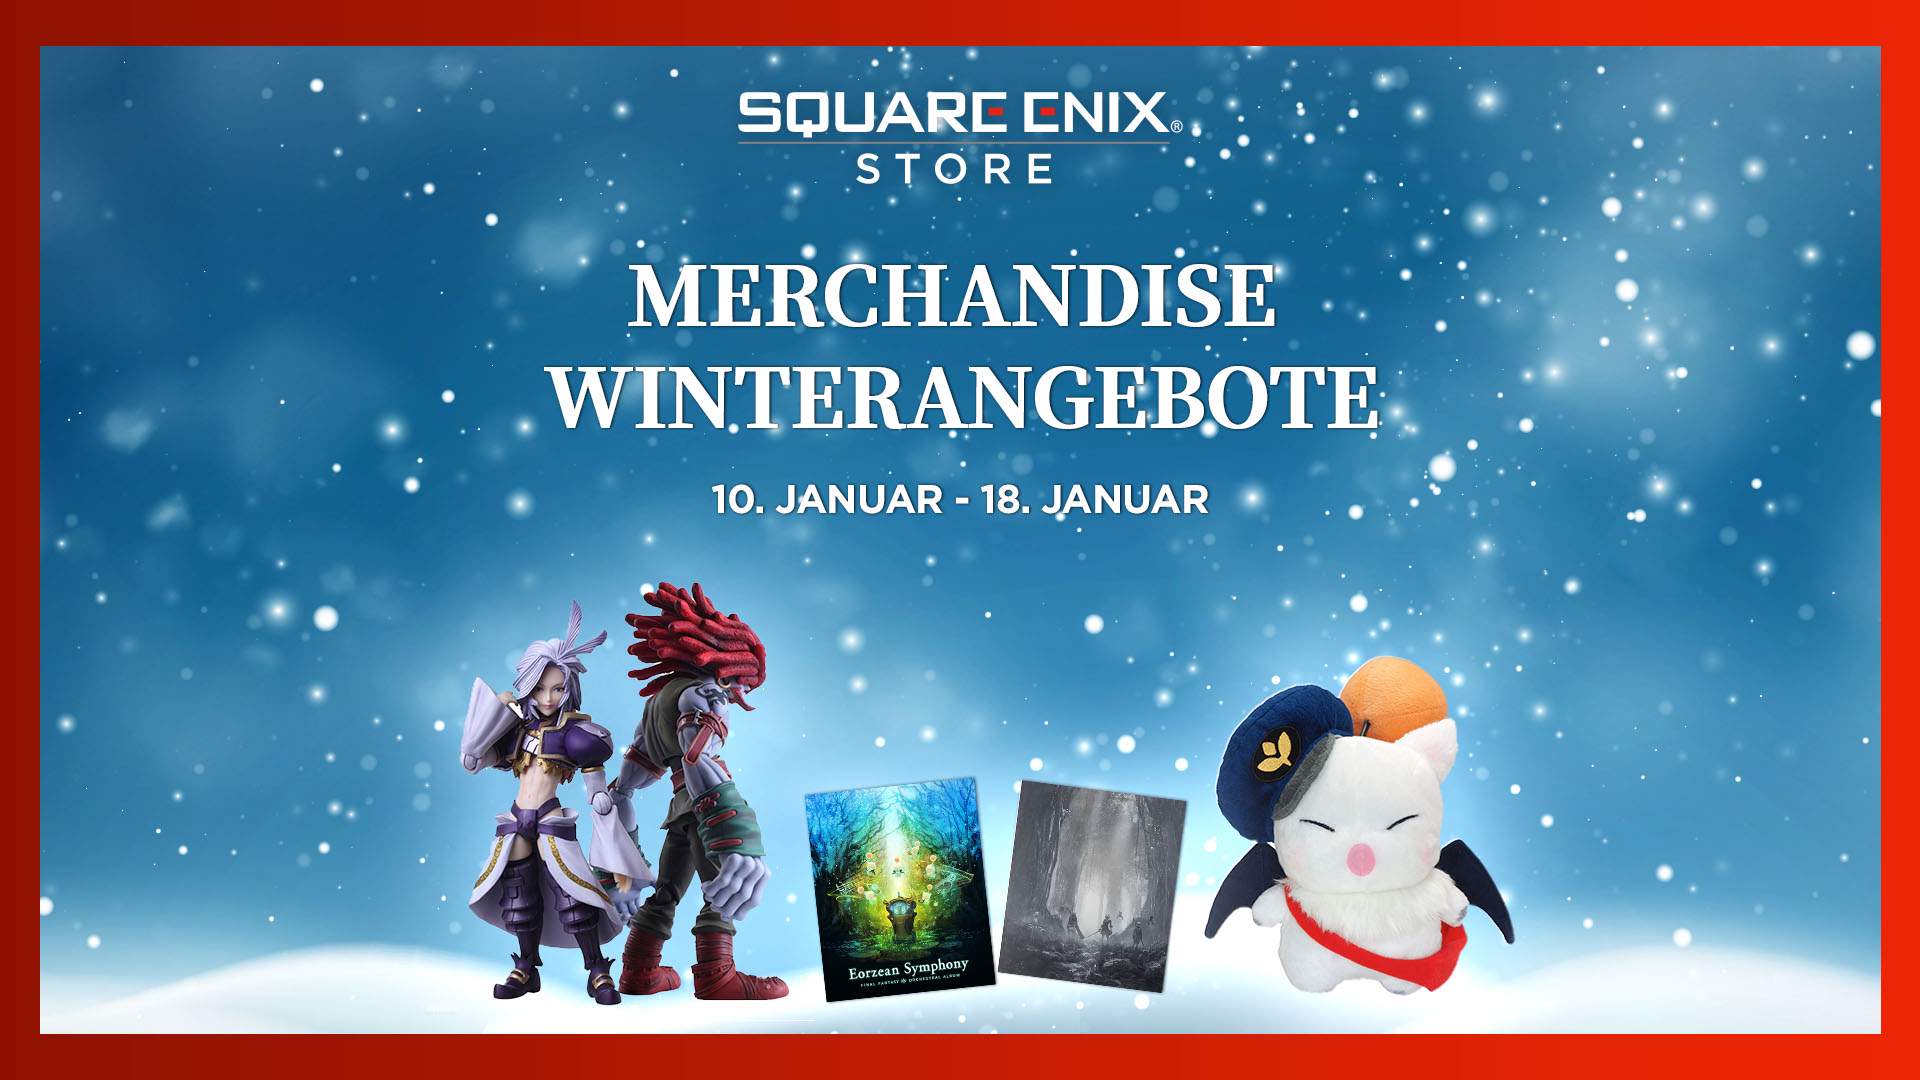 Wintery blue background with snow falling for the Square Enix Store Merchandise Winter Promotion